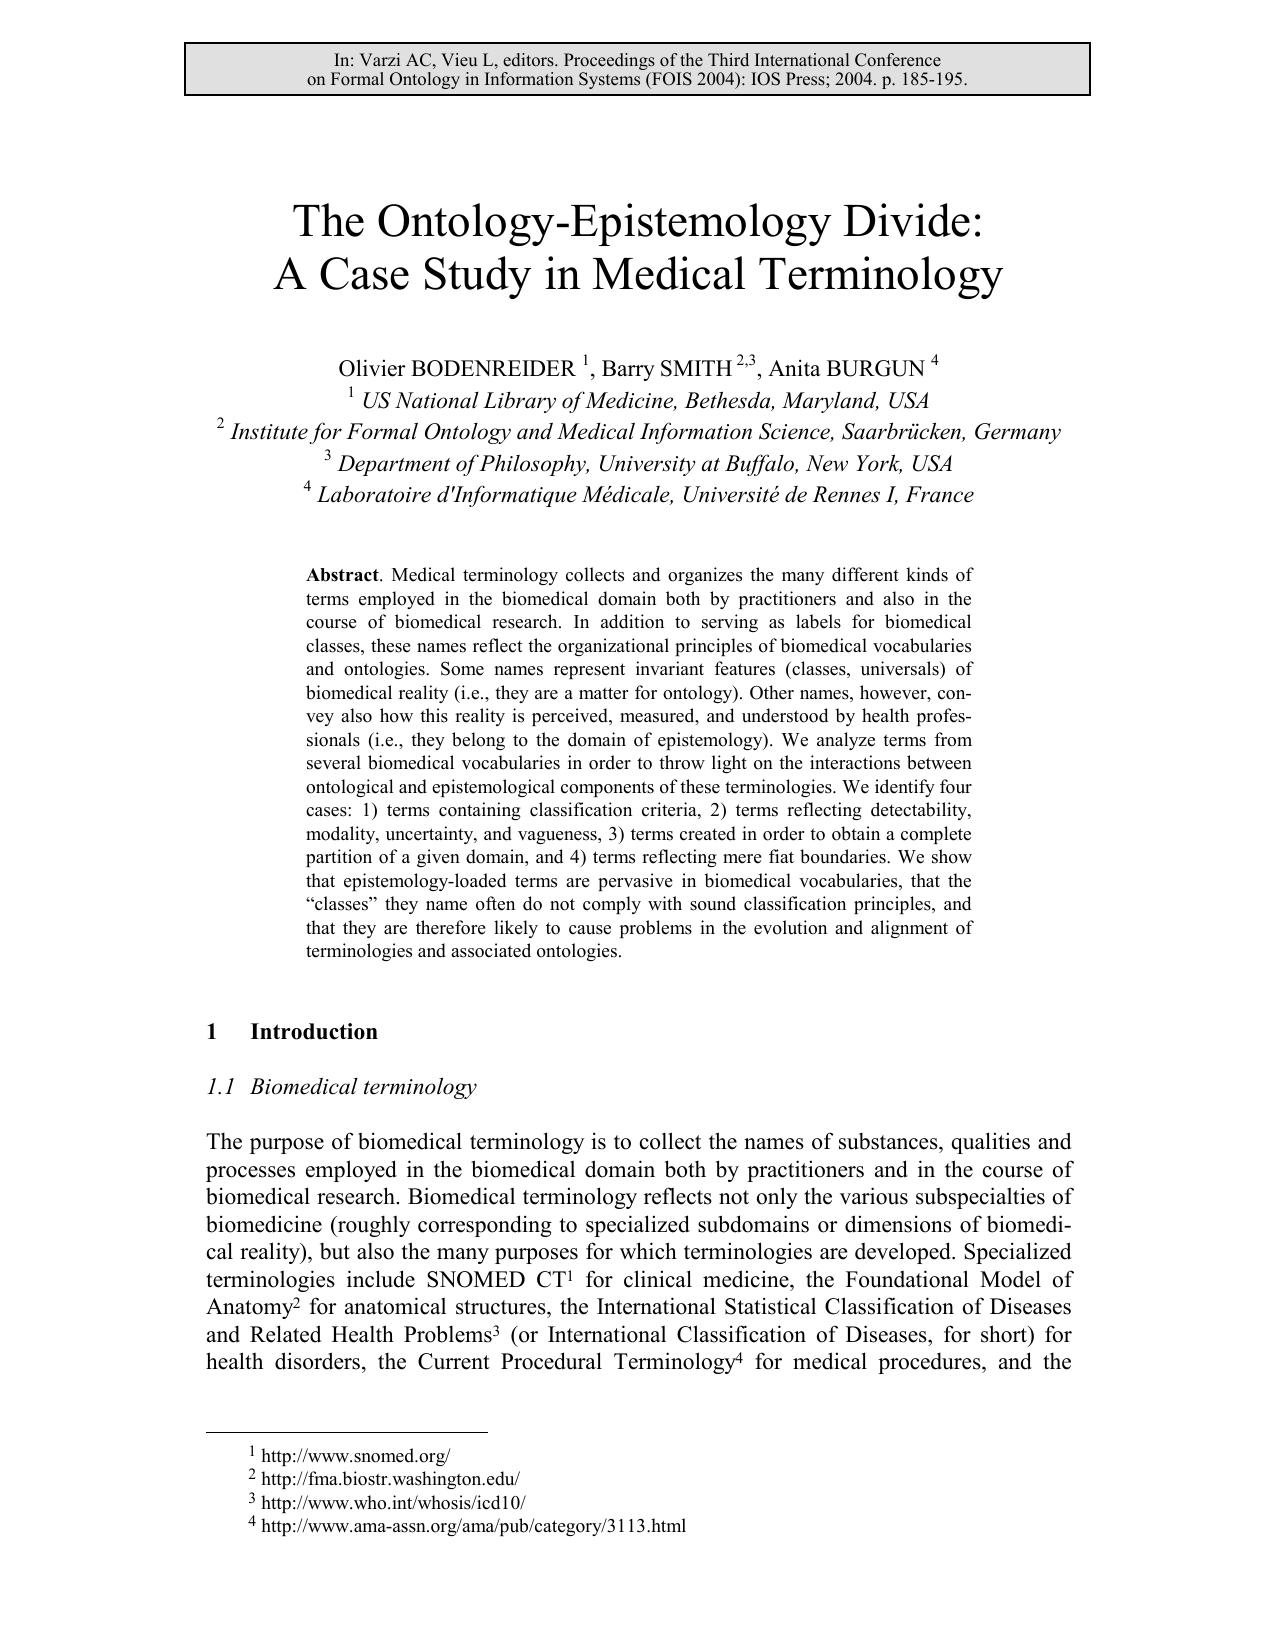 The Ontology-Epistemology Divide: A Case Study in Medical Terminology - Paper